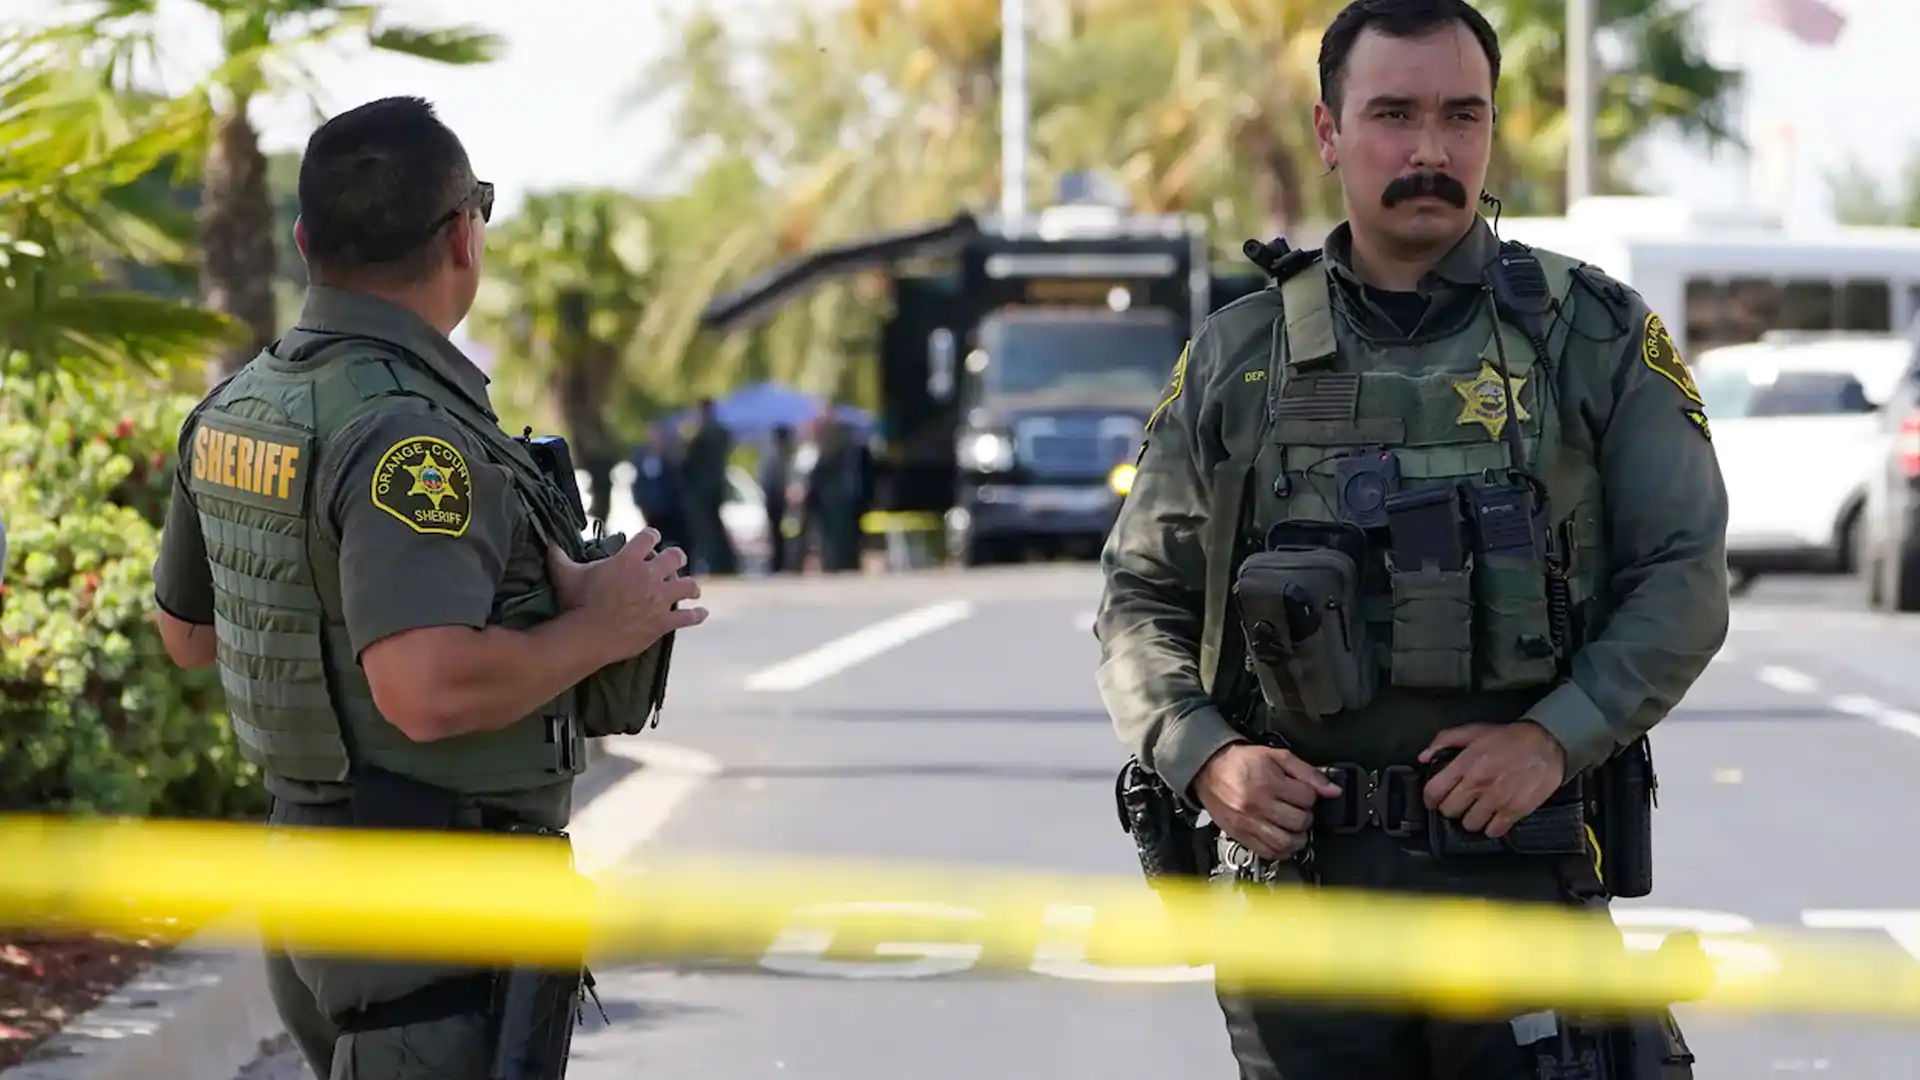 California church shooting: One killed, five injured; suspect detained